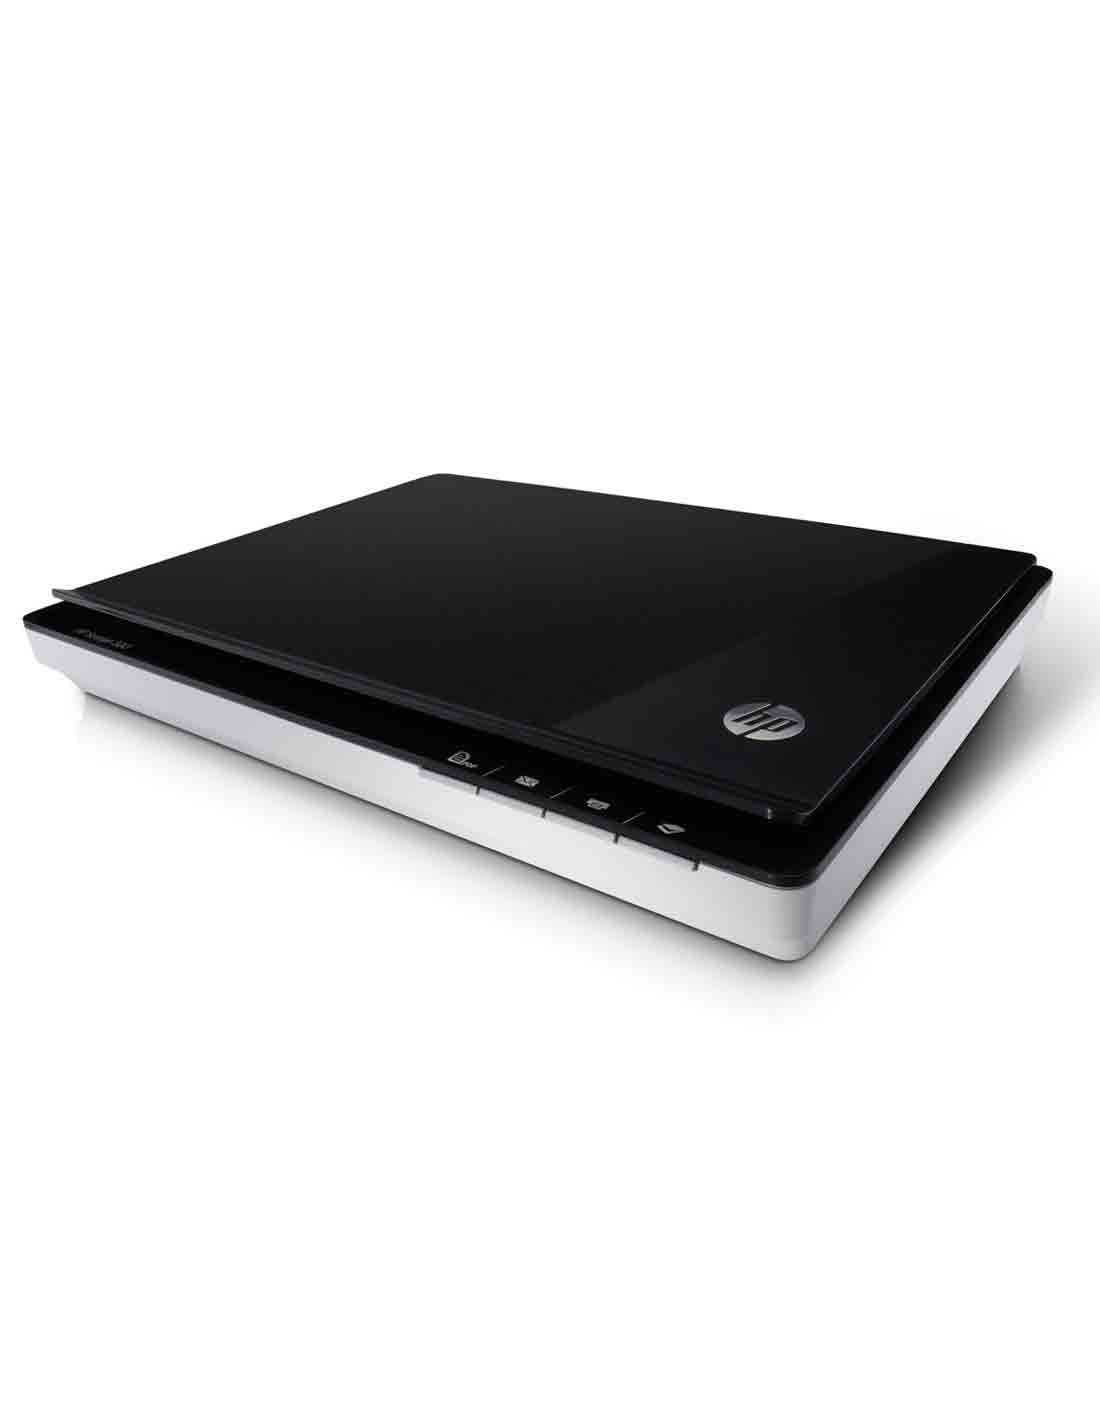 HP ScanJet 300 Flatbed Photo Scanner (L2733A) at a cheap price and free delivery in Dubai